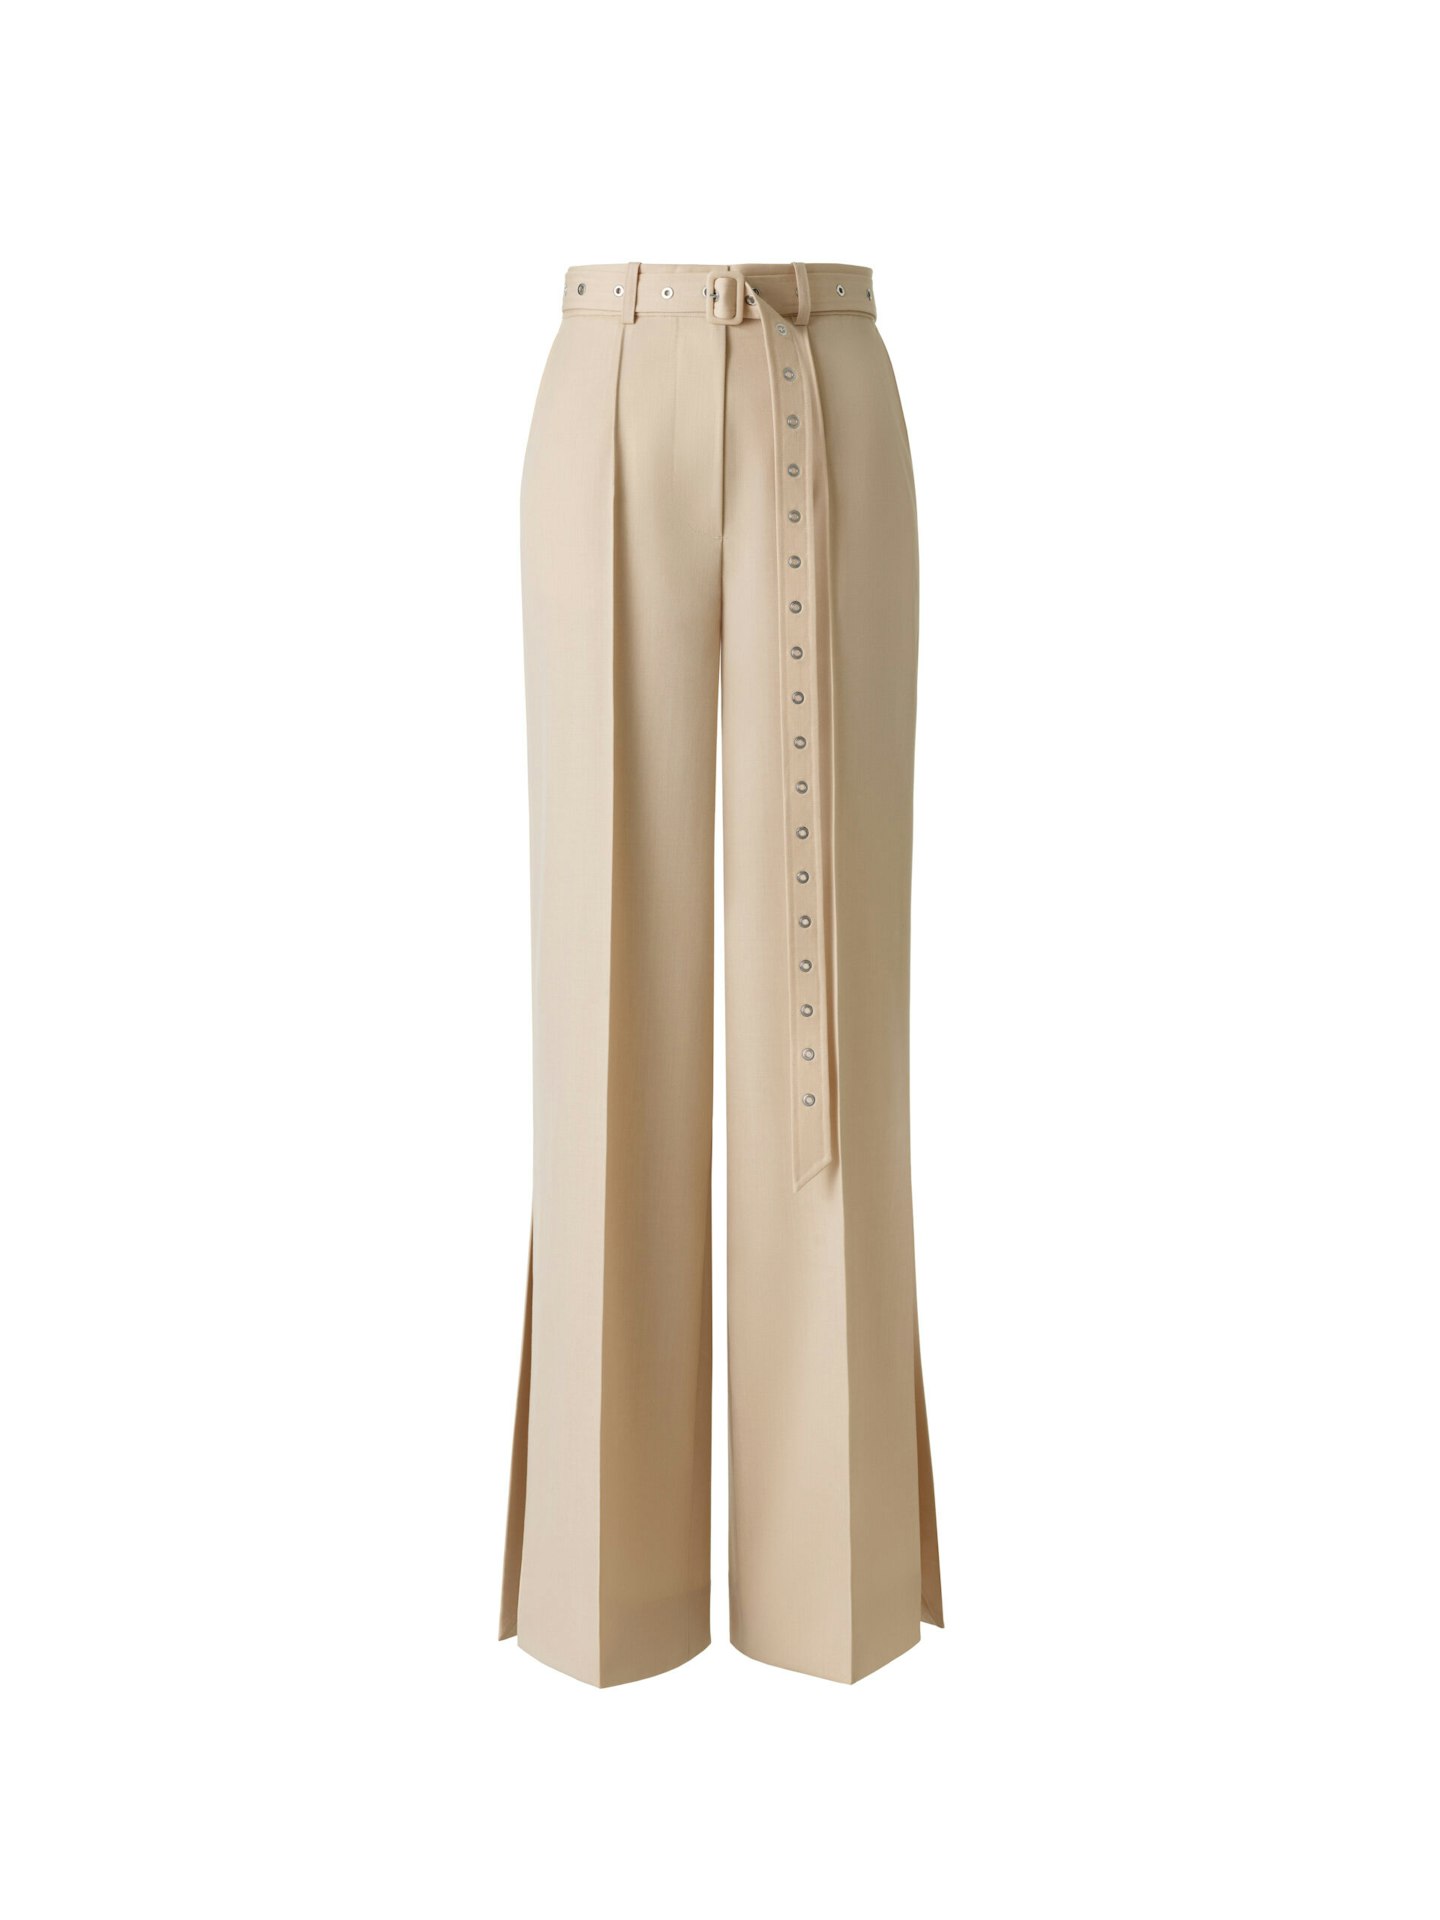 rokh h&m trousers 